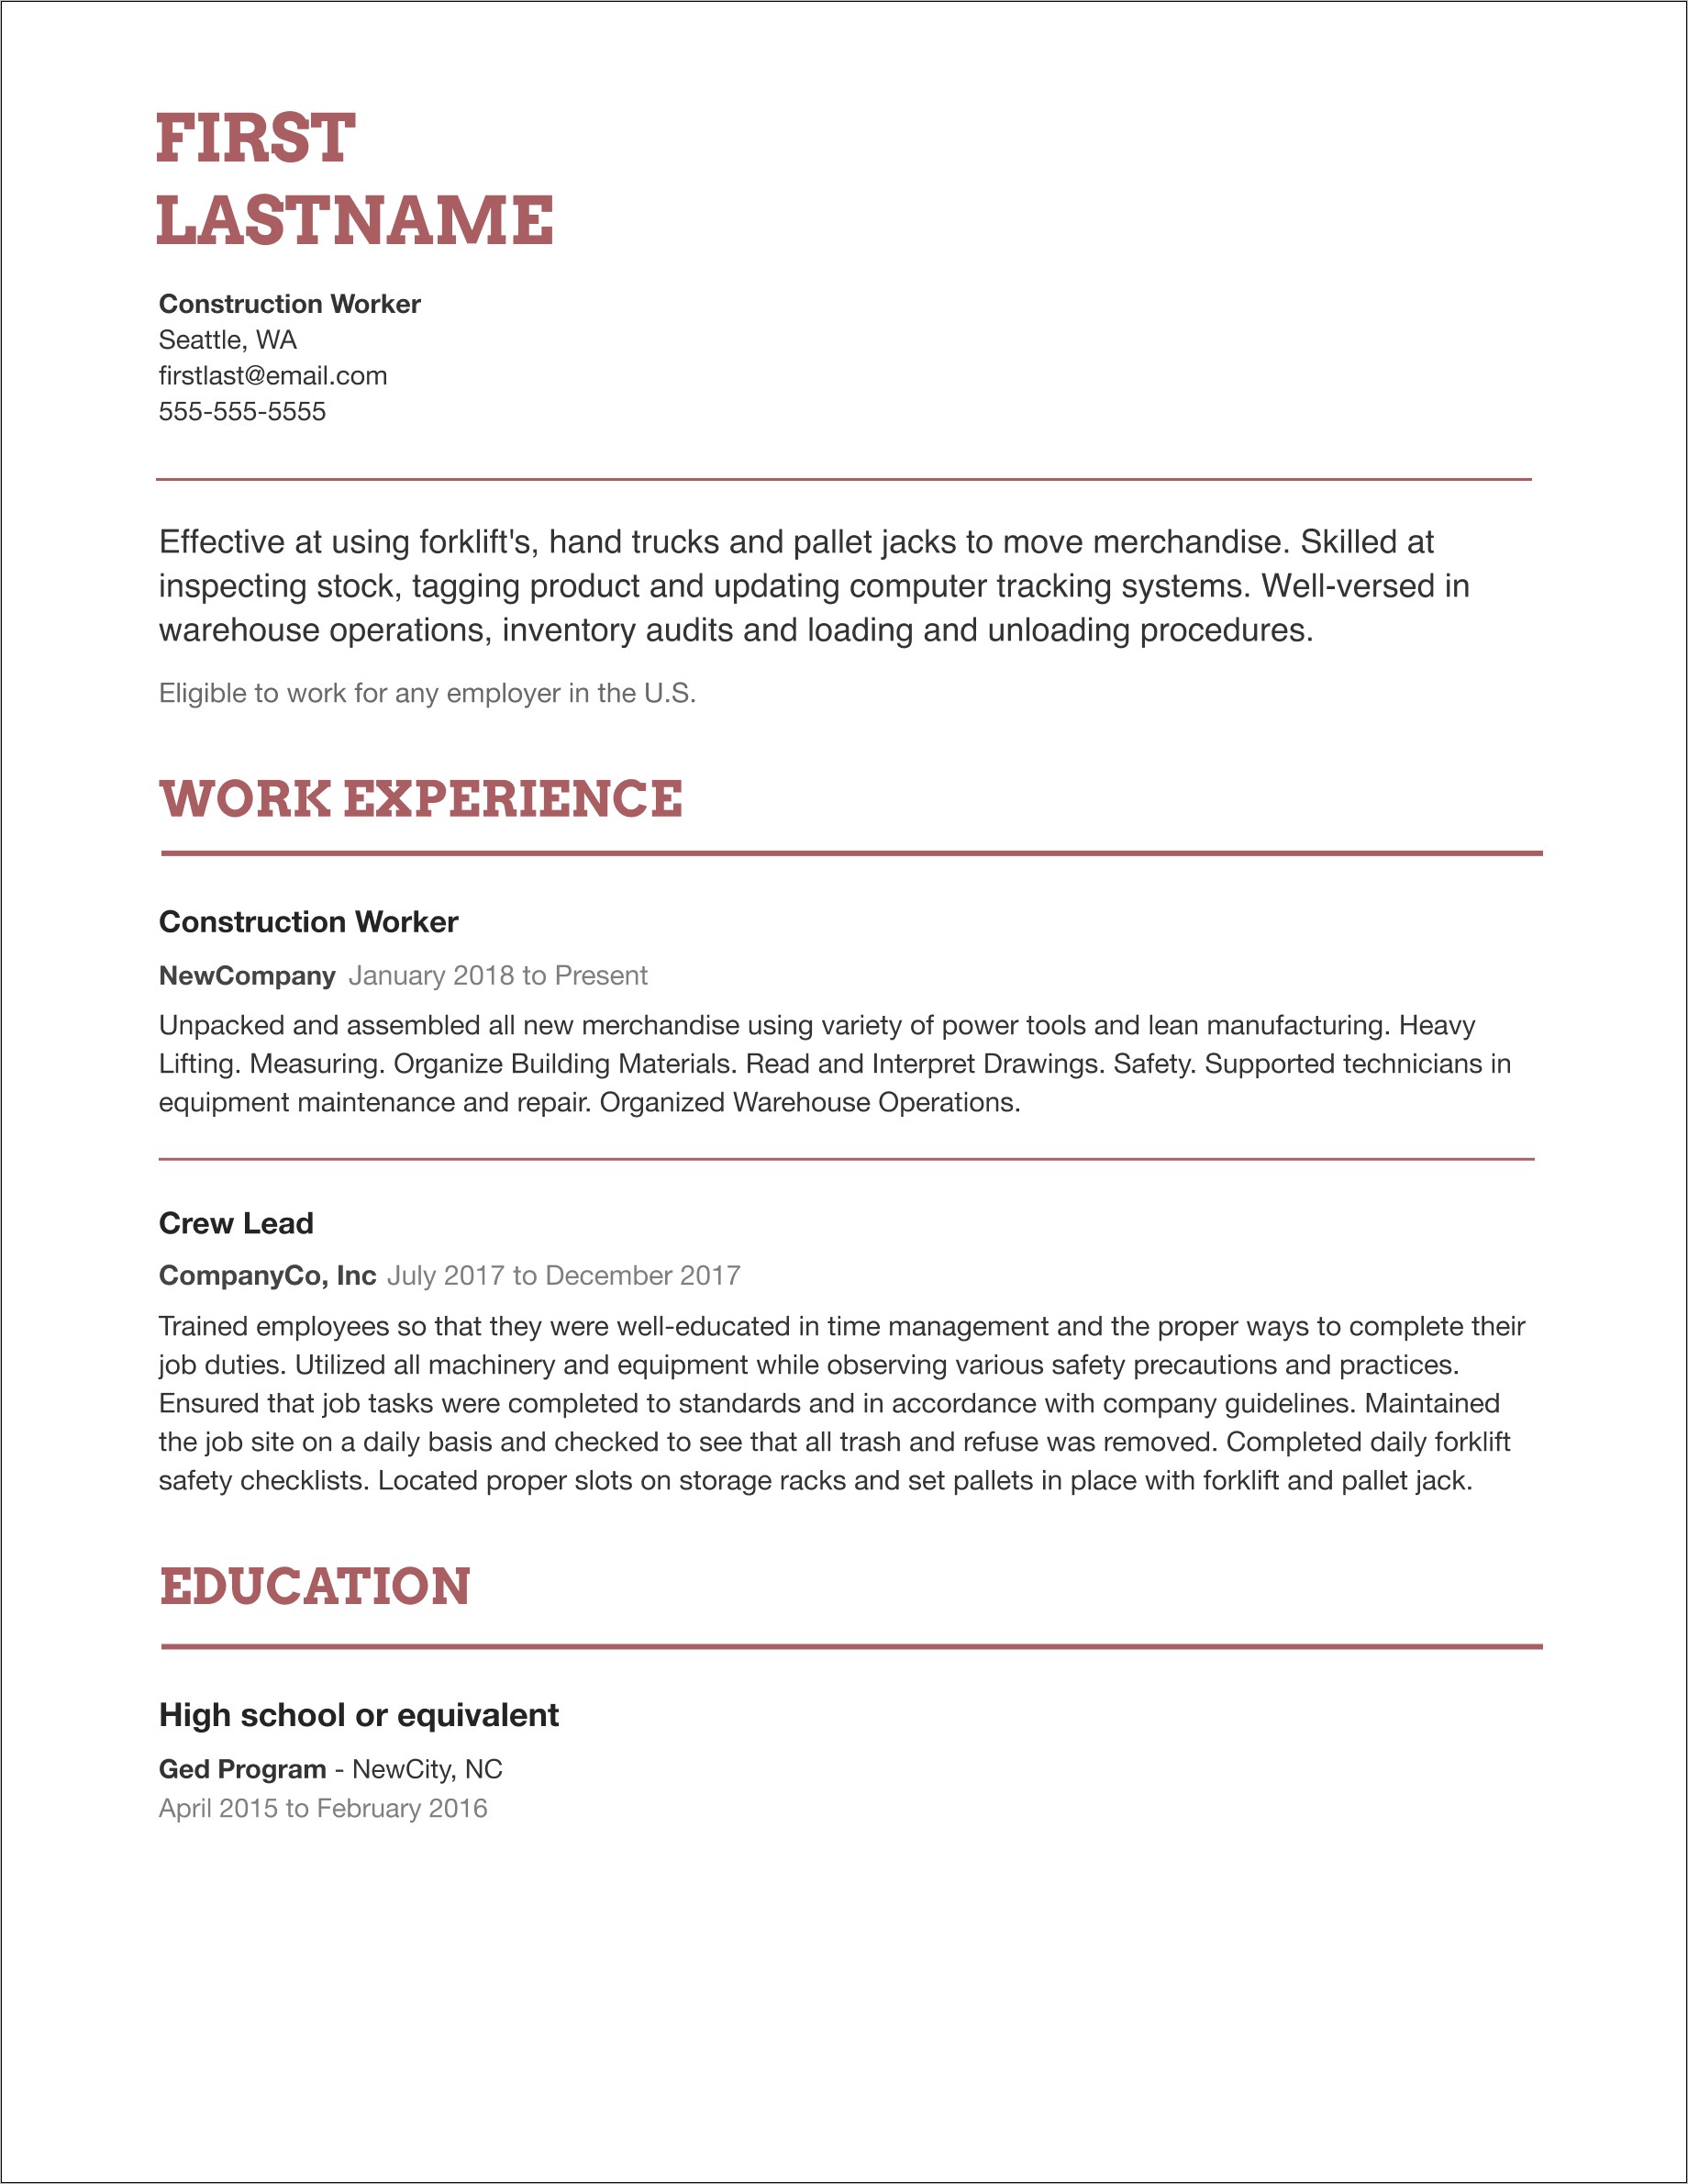 Sample Resumes For Corporate Jobs